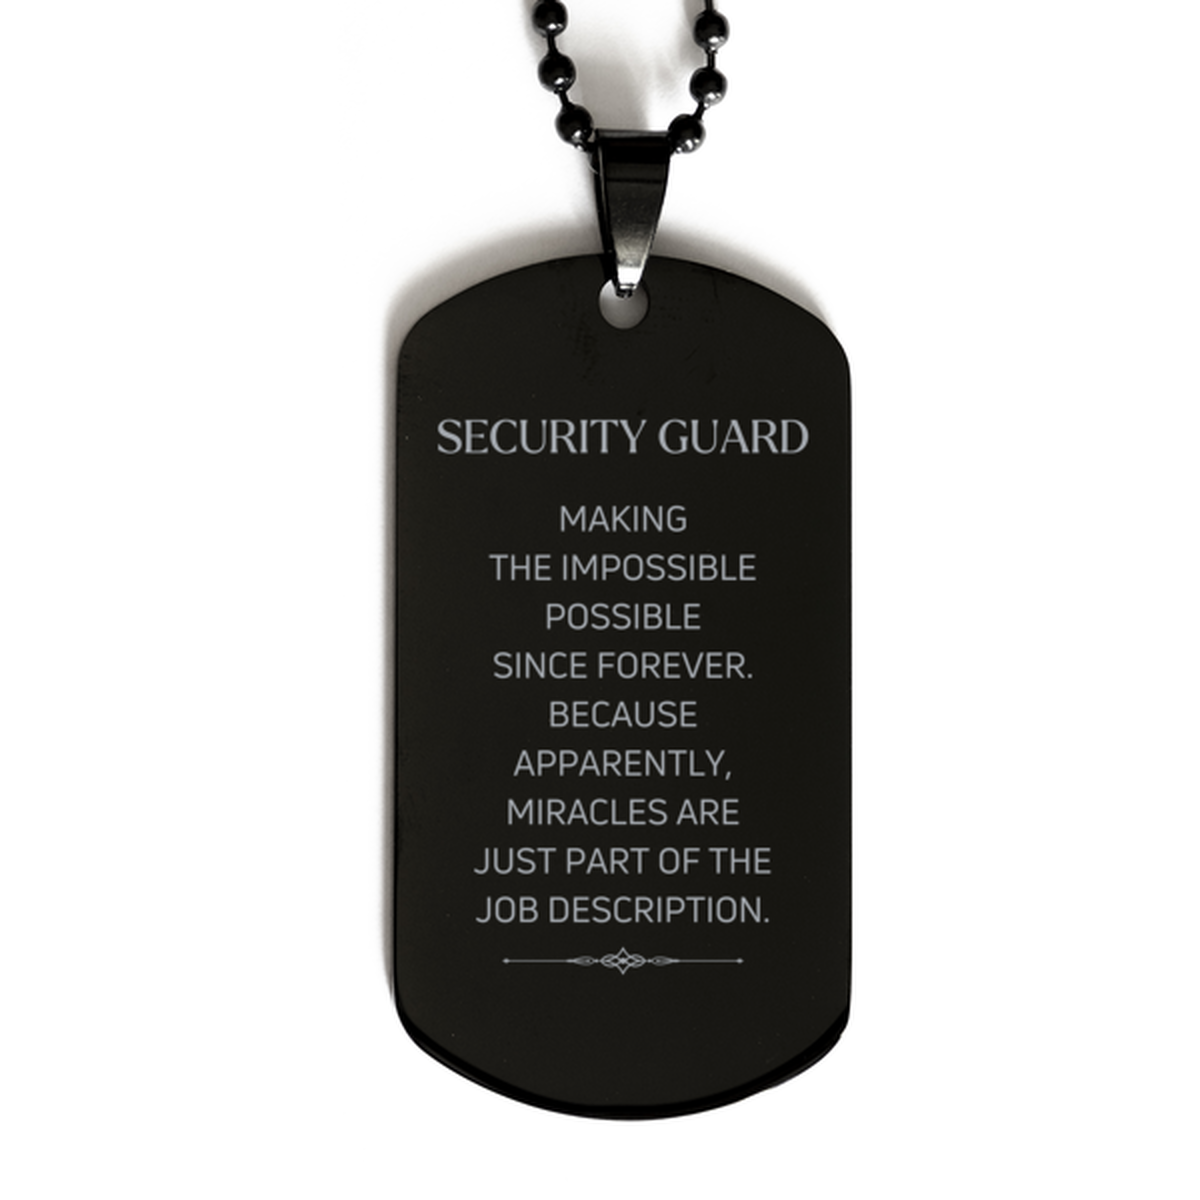 Funny Security Guard Gifts, Miracles are just part of the job description, Inspirational Birthday Black Dog Tag For Security Guard, Men, Women, Coworkers, Friends, Boss